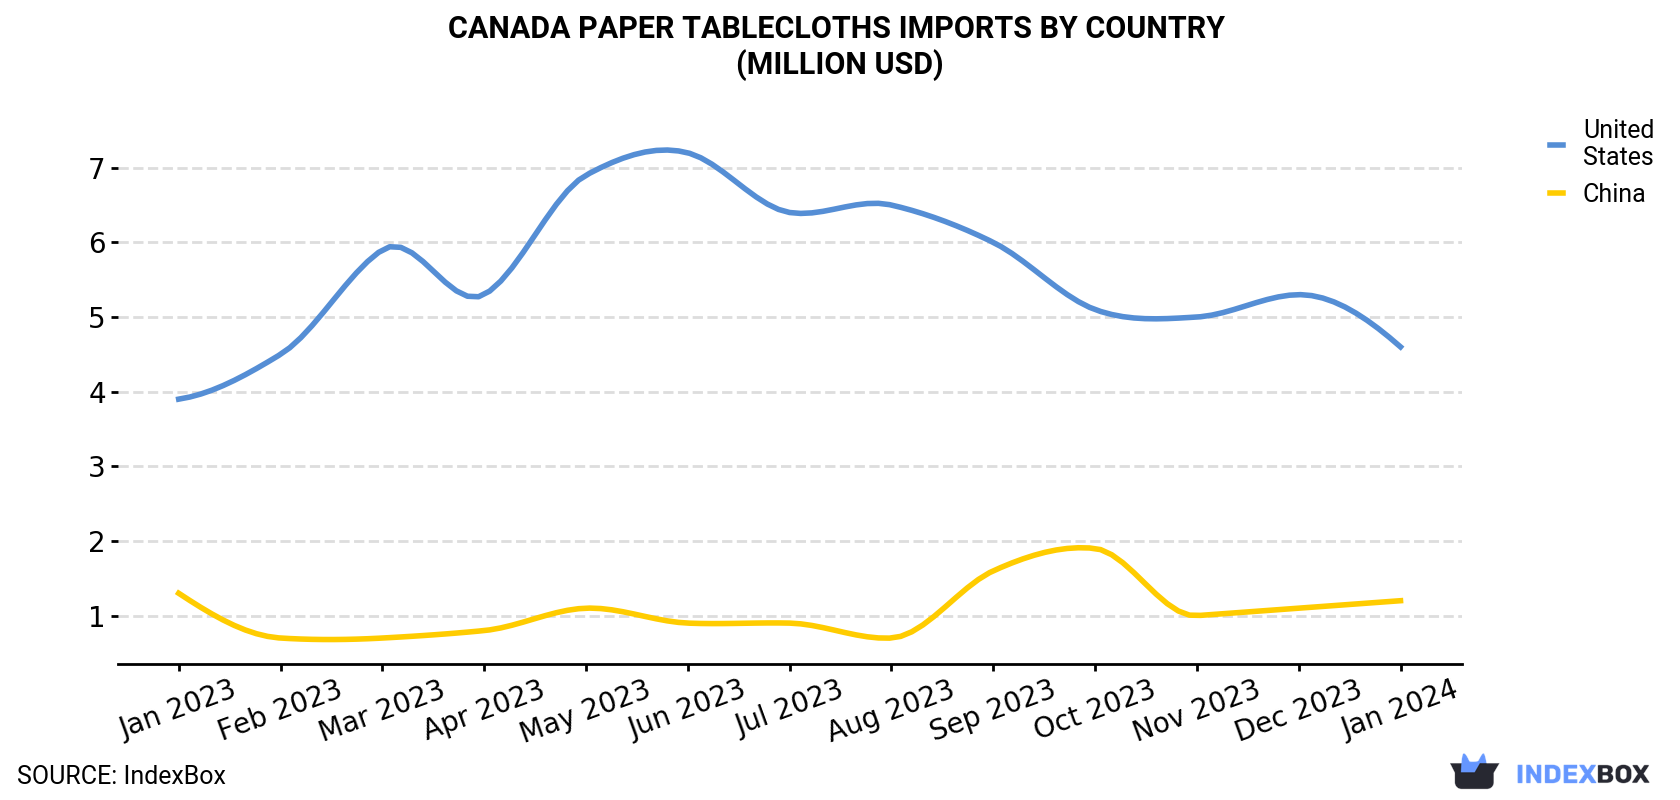 Canada Paper Tablecloths Imports By Country (Million USD)